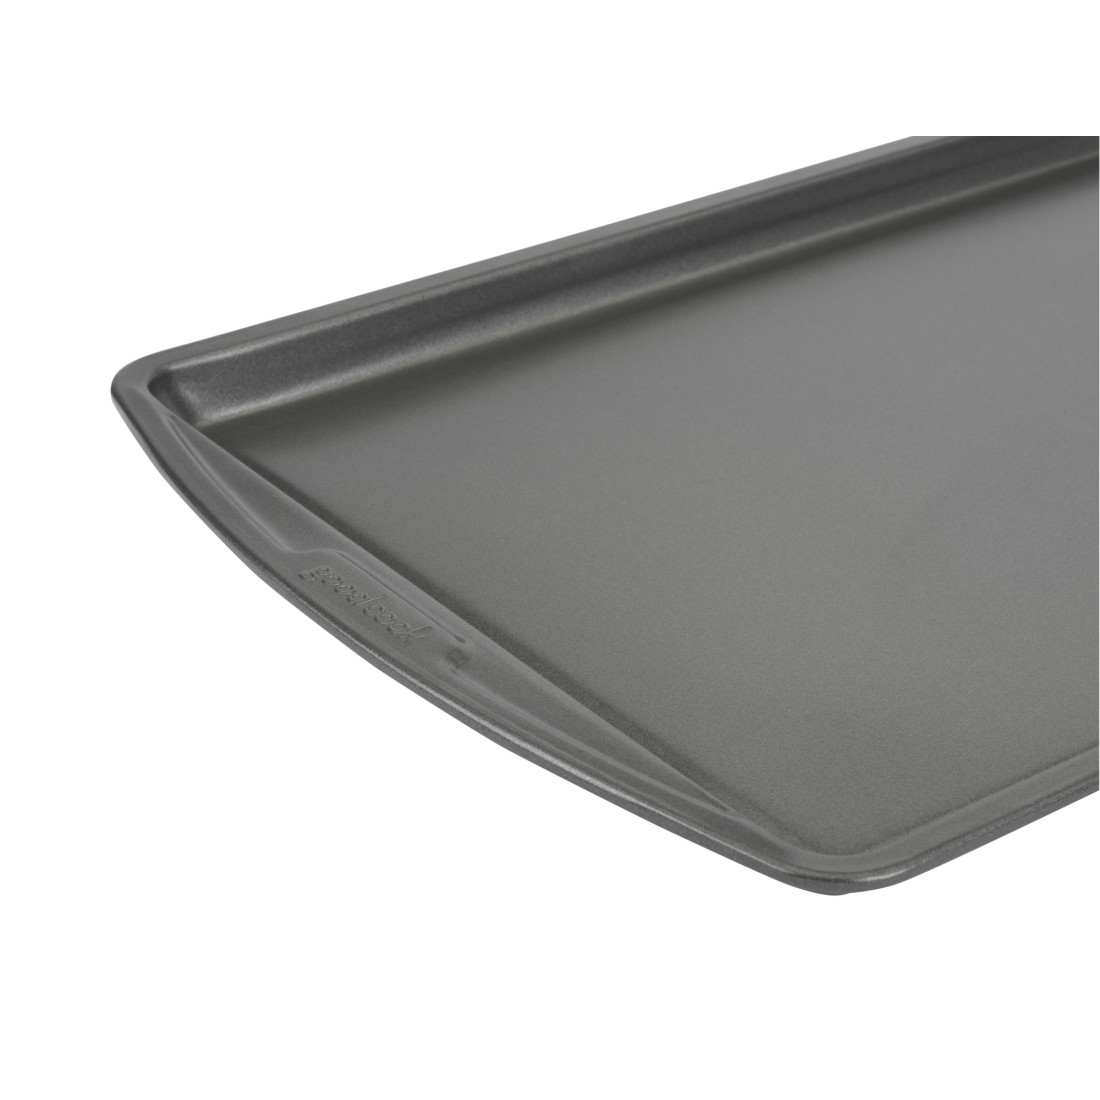  Good Cook Cookie Baking Sheet, 15 x 10 Inch, Gray